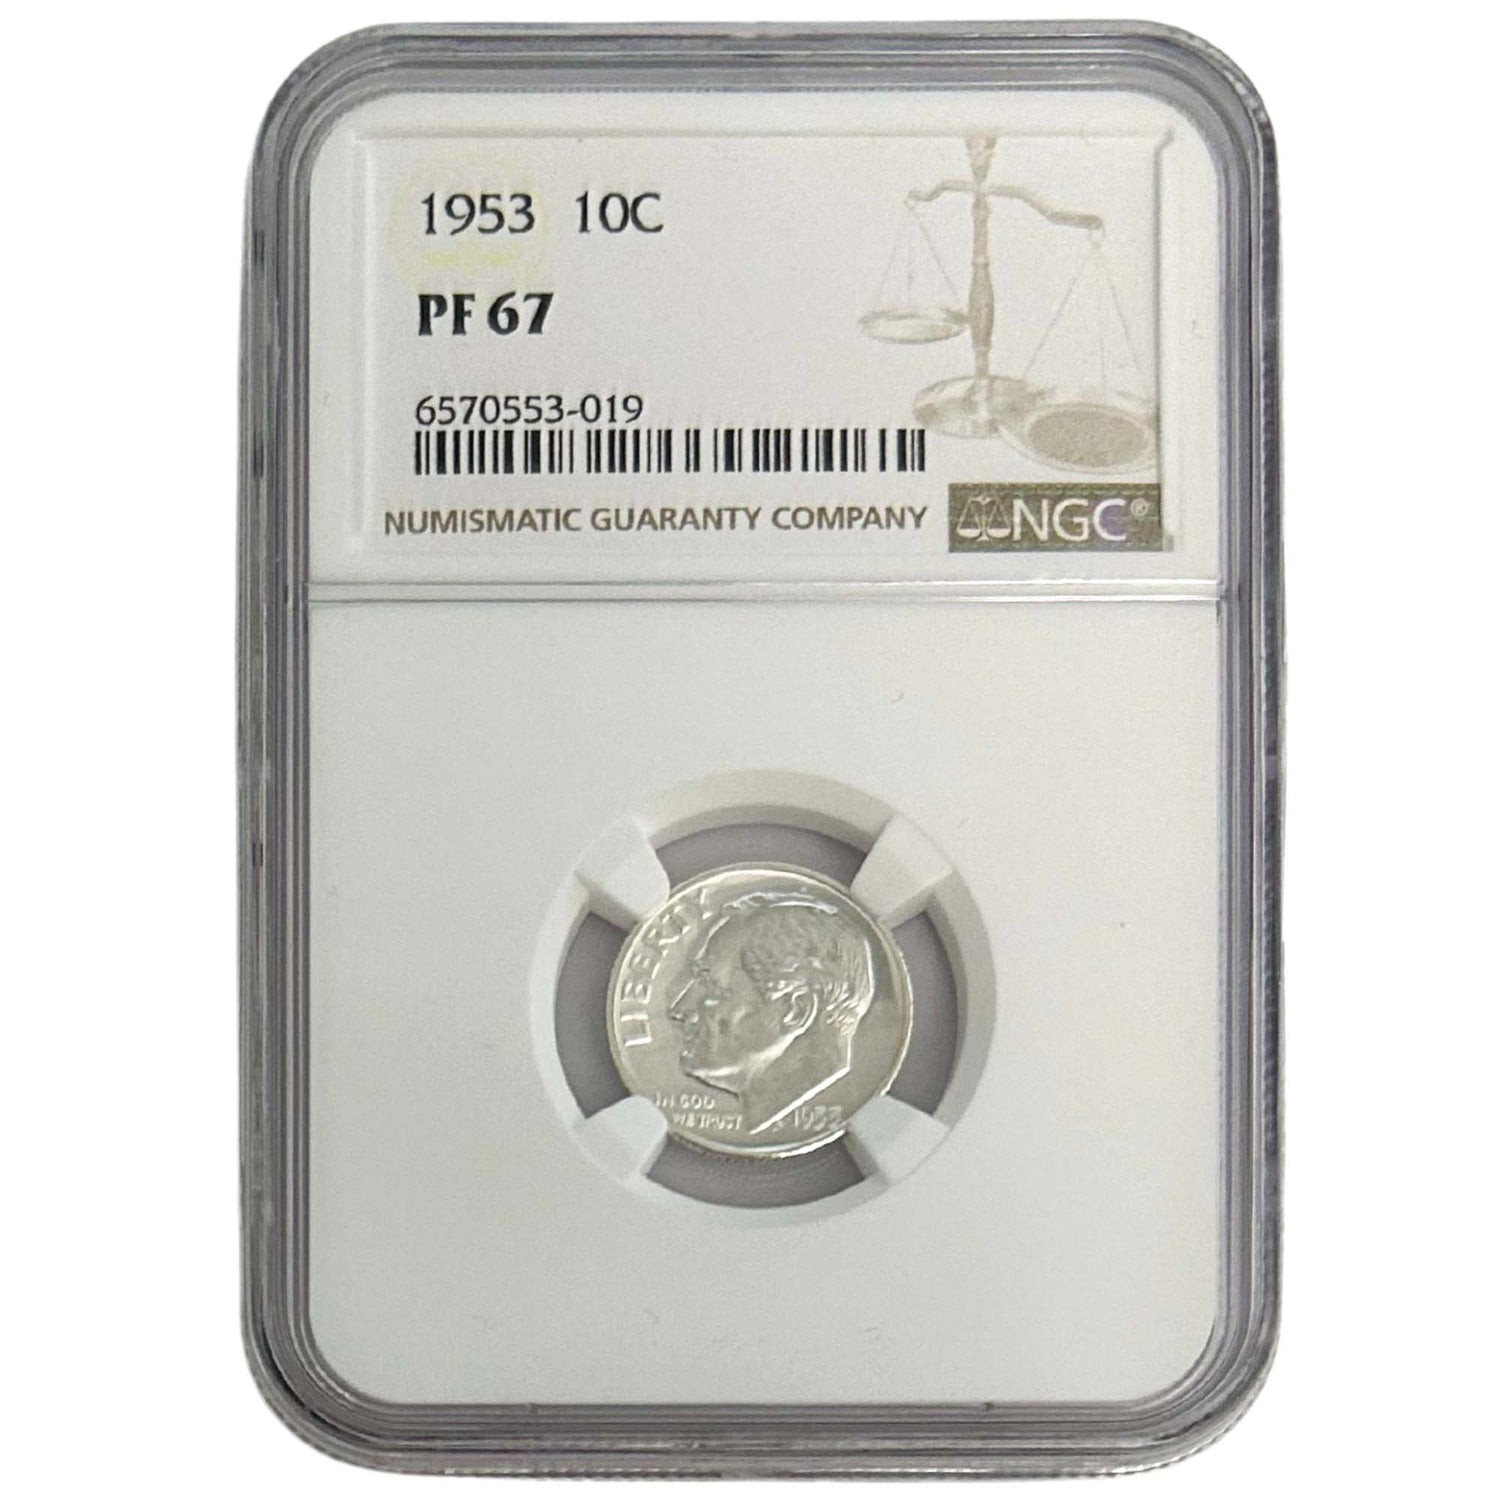 1953 10C PF 67 Graded NGC Front